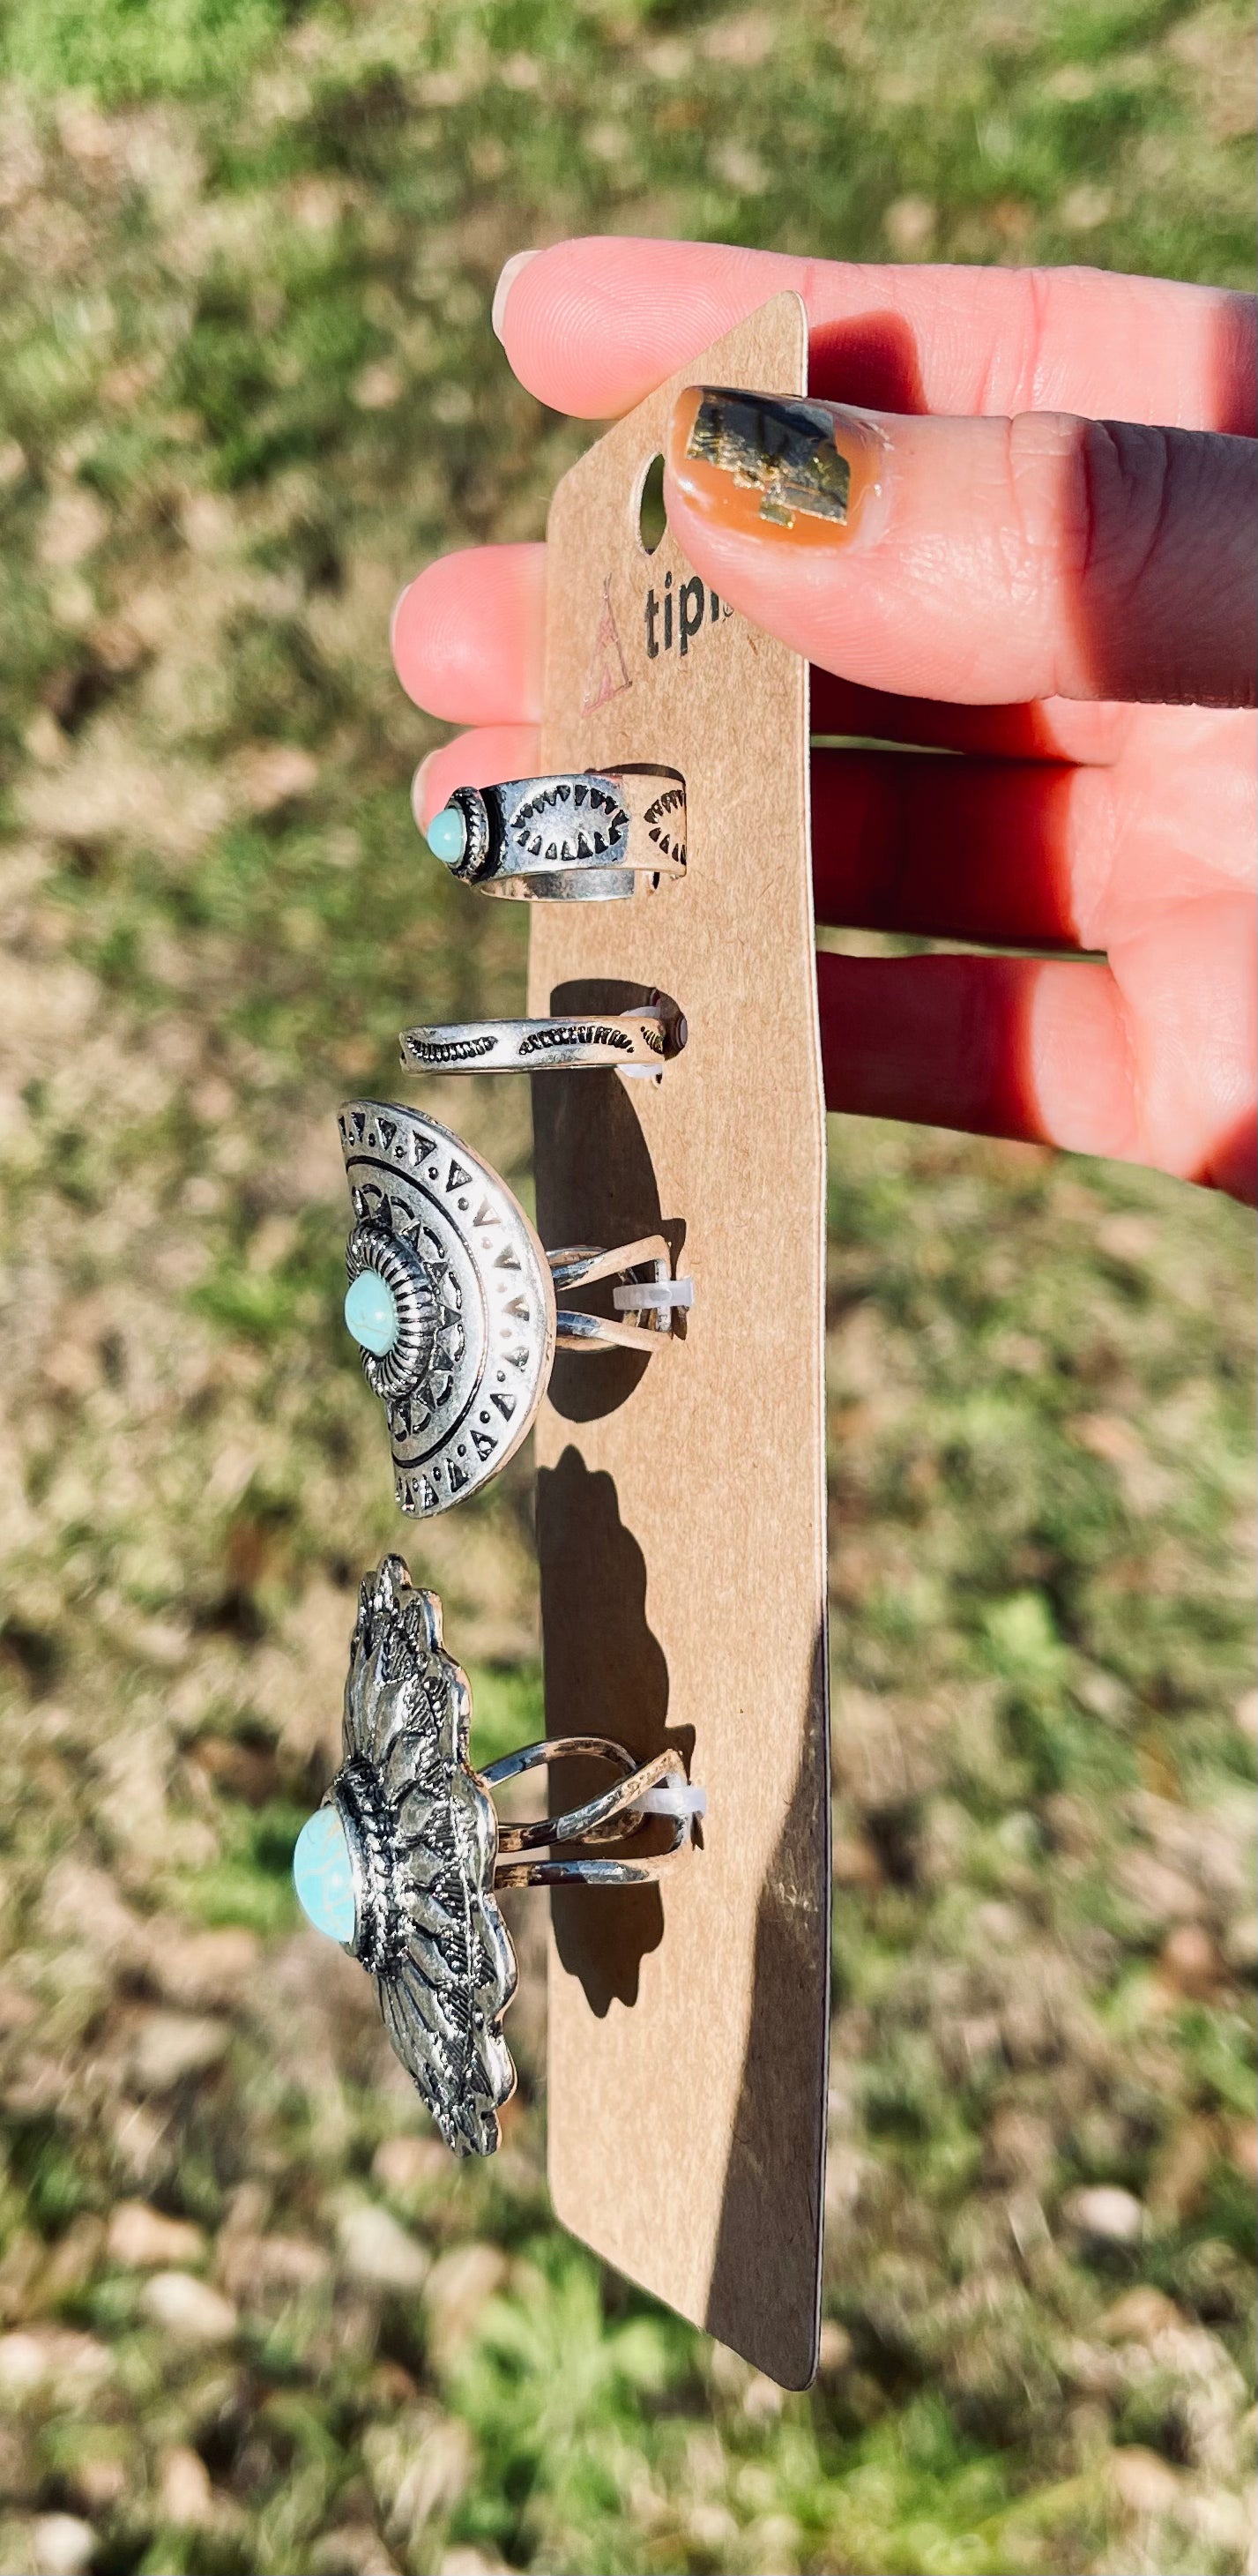 Claire Ring Set